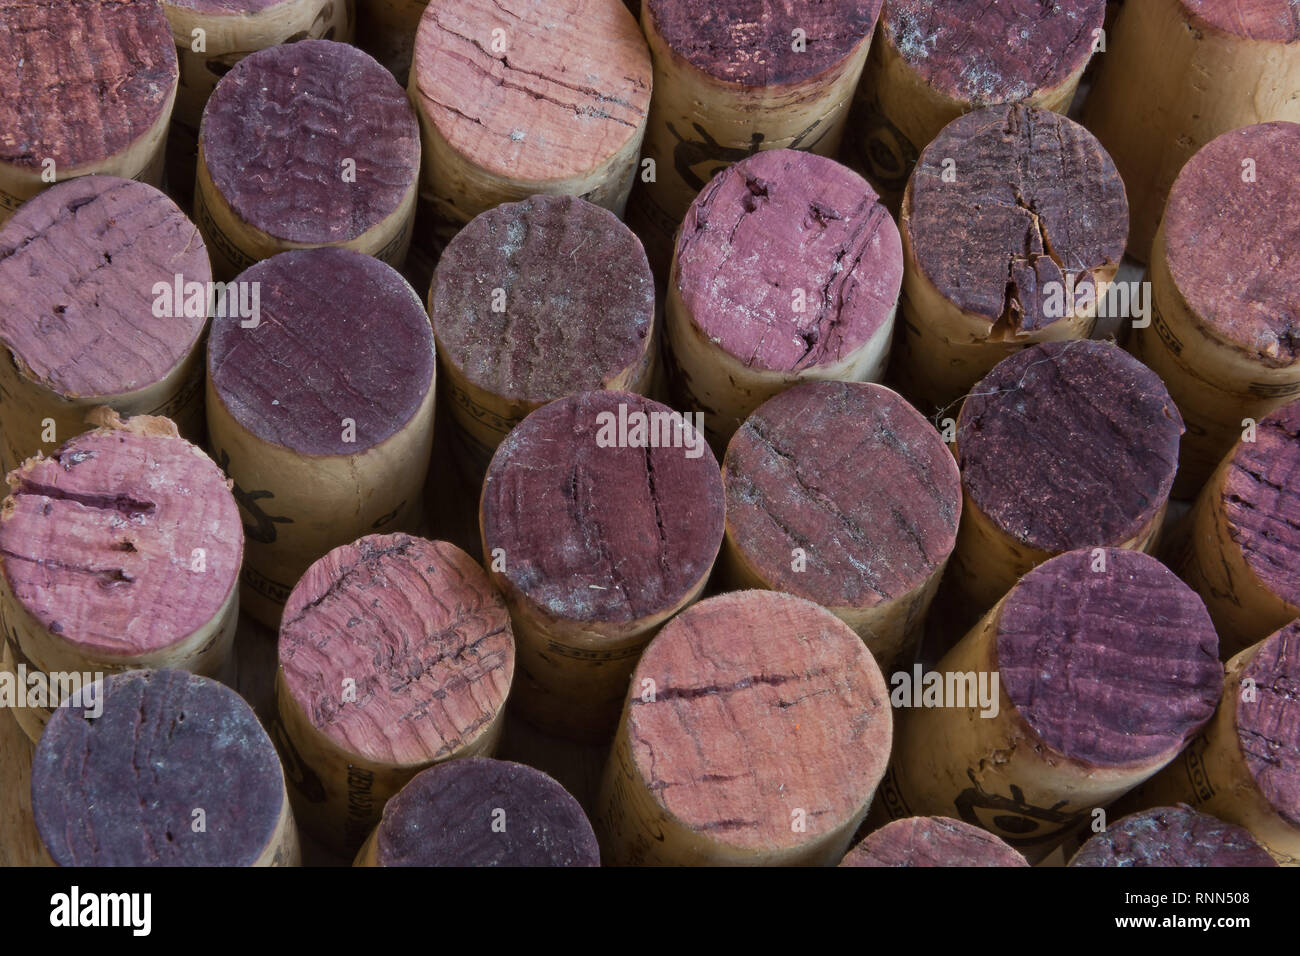 An exhibition of different corks made with wine bottle corks Stock Photo